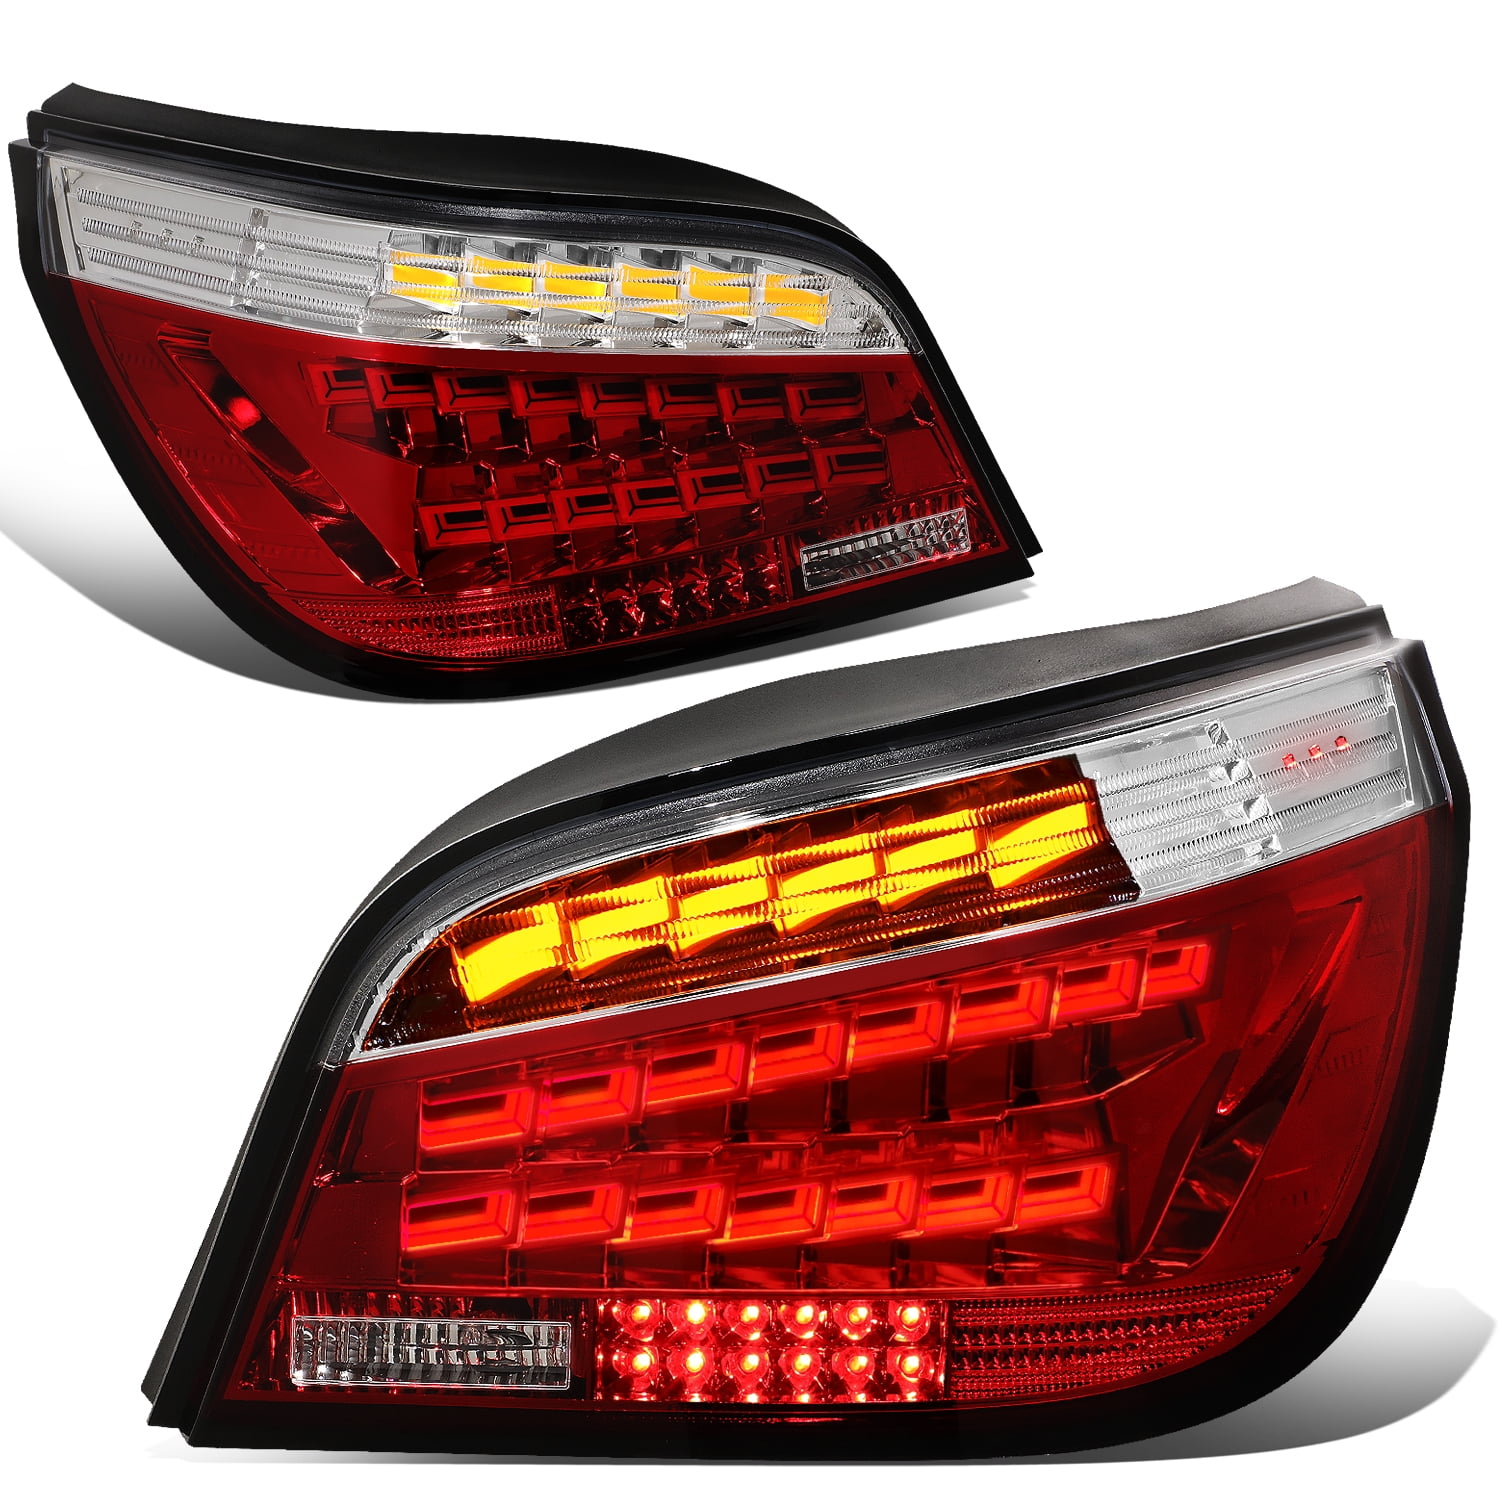 DNA Motoring TL-LED-OL-E6003-RD-CL For 2004-2007 BMW E60 525 530 545 550  Sedan Pair Clear Lens OLED Squential Rear Tail Lights Brake Lamp  Replacement